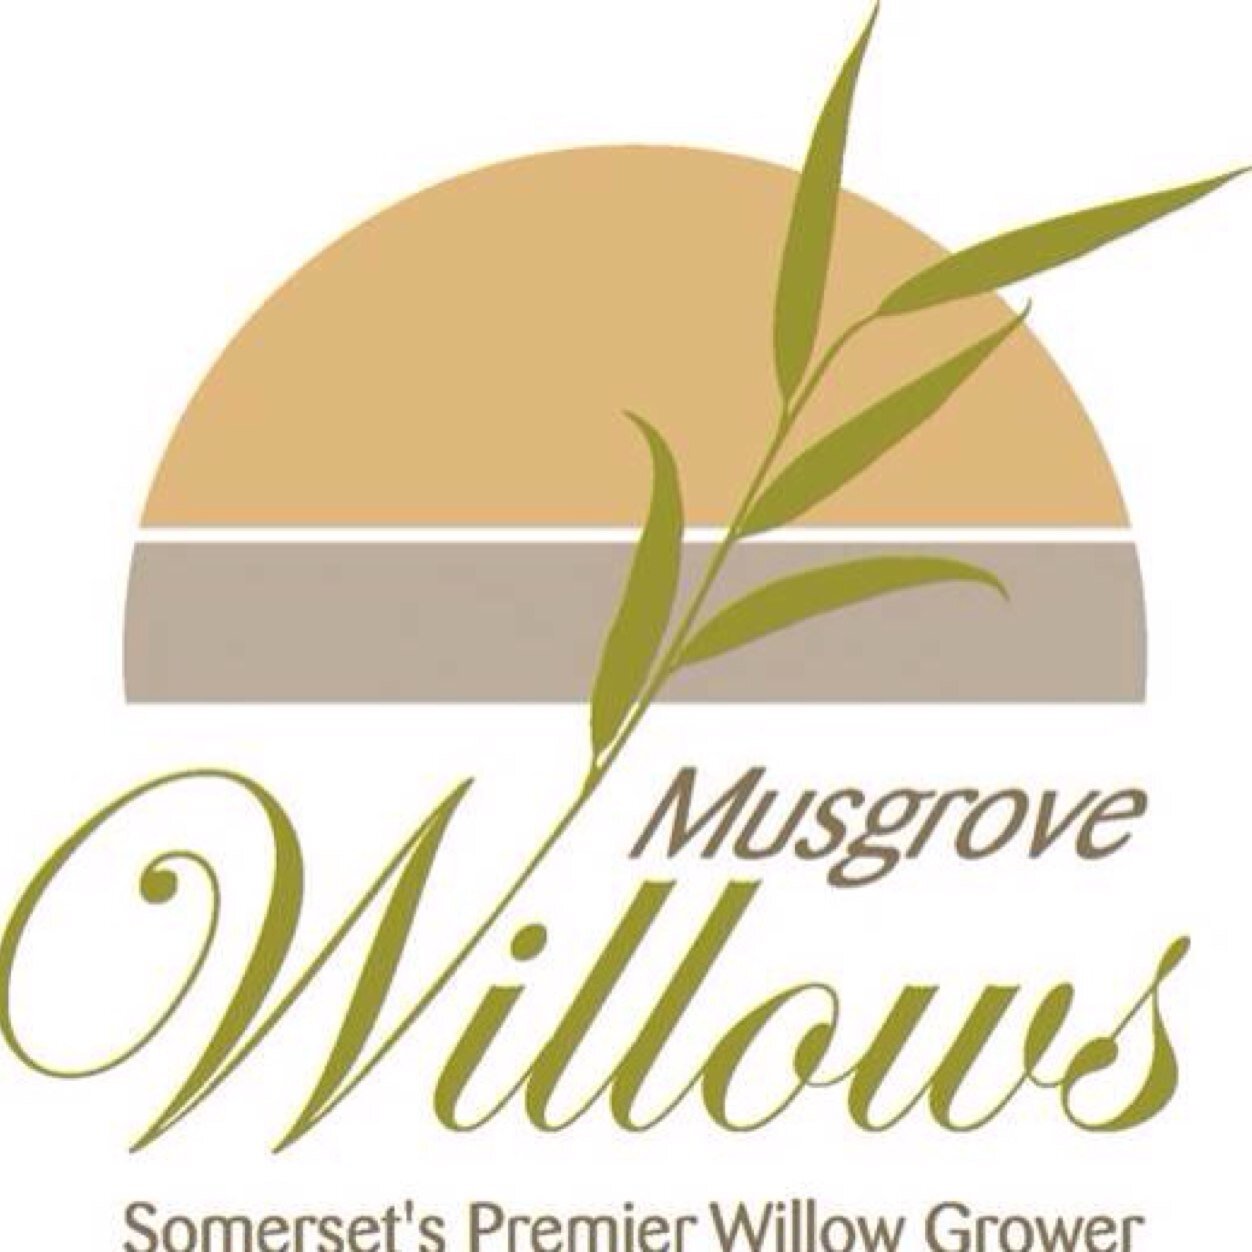 Leading willow growers based in Somerset, England. We supply businesses & individuals with top quality willow & willow products. All made here